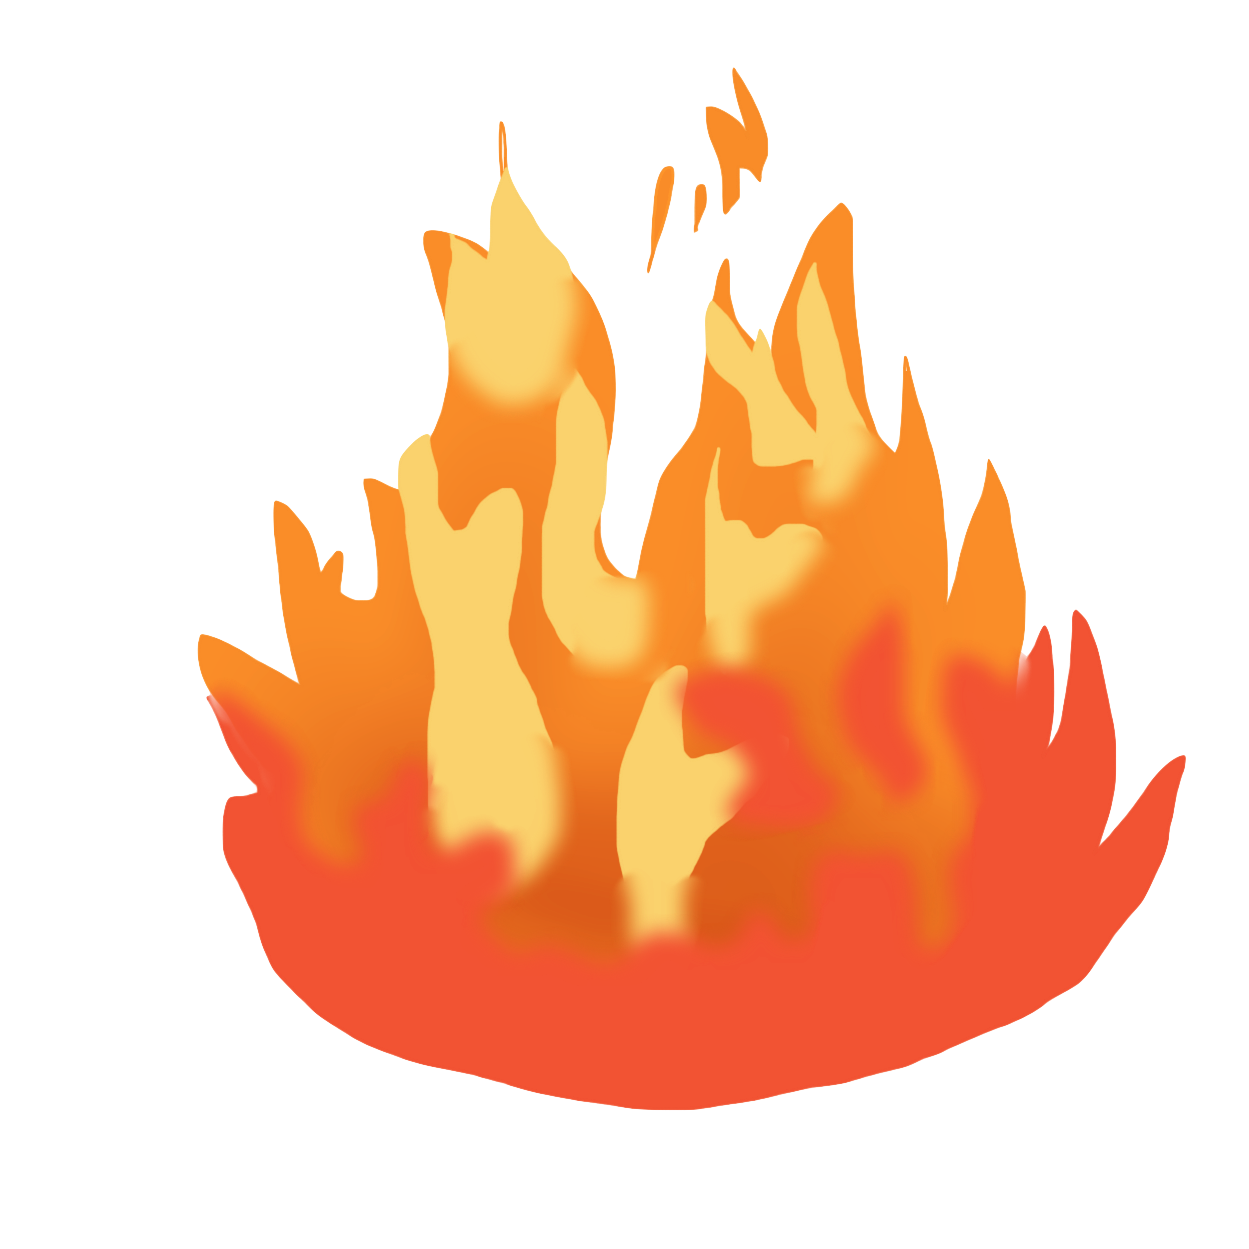 Fire image vector.